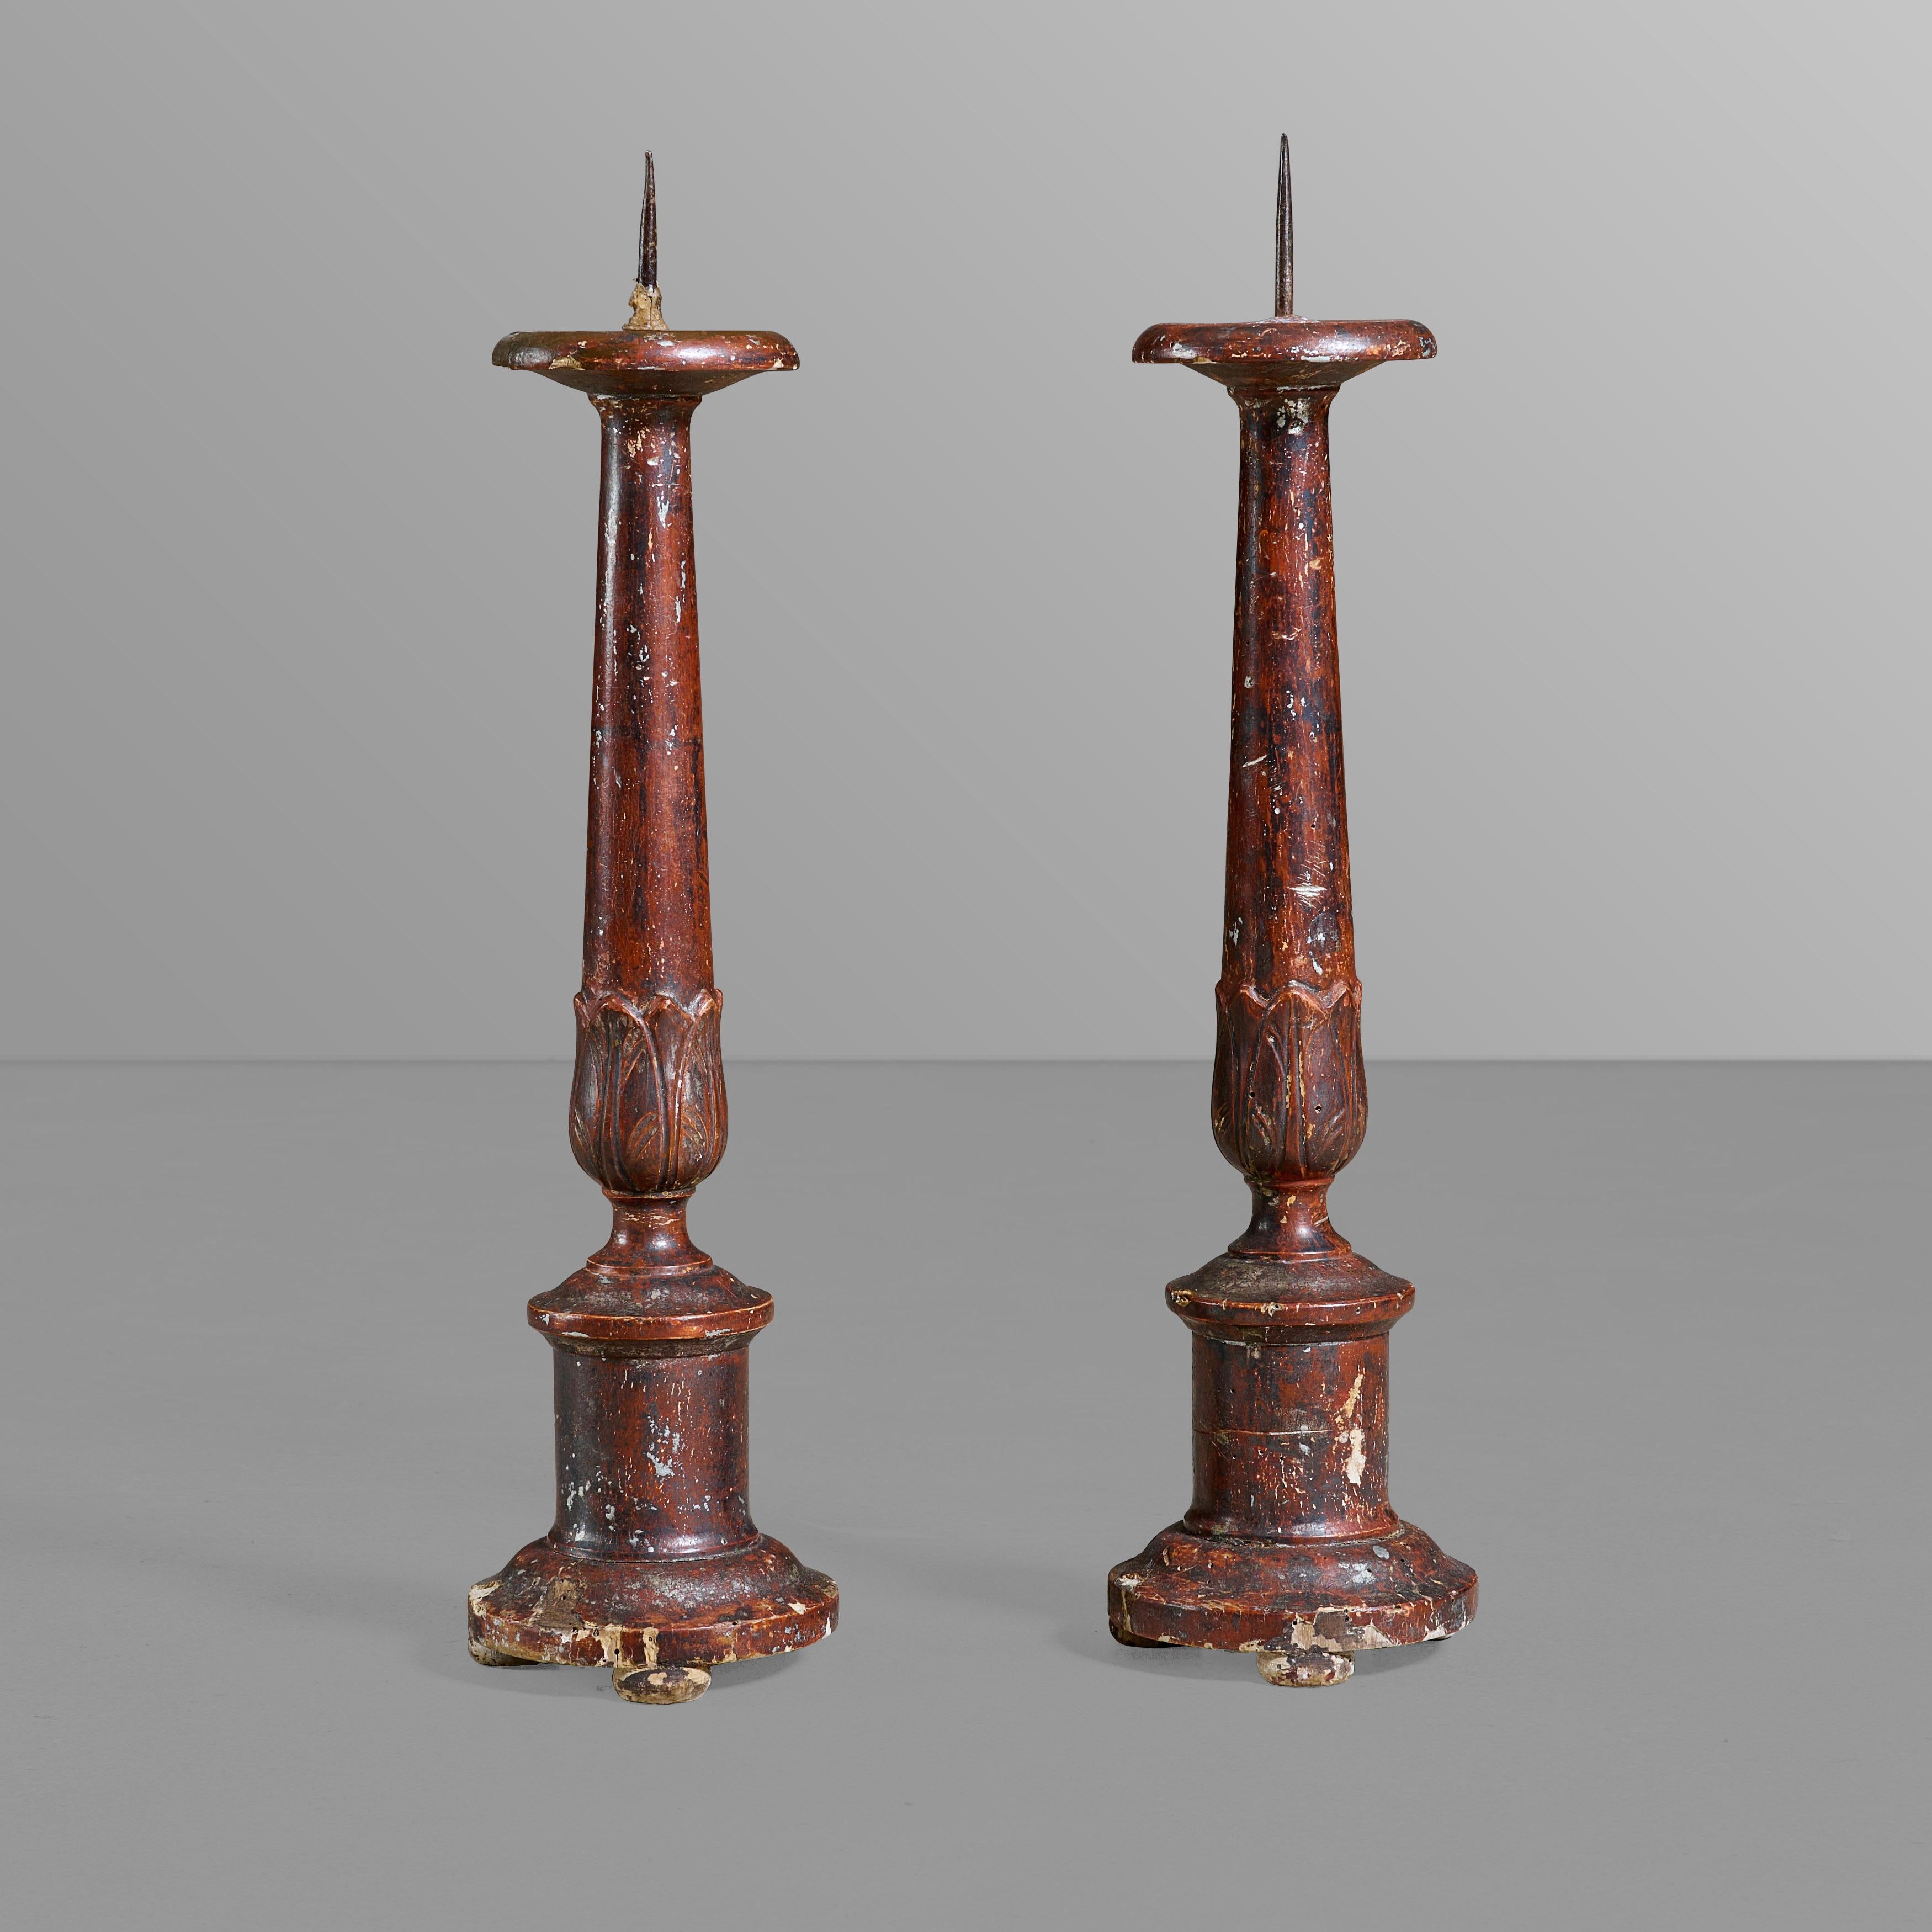 Pair of candle sticks with perfect patina.

